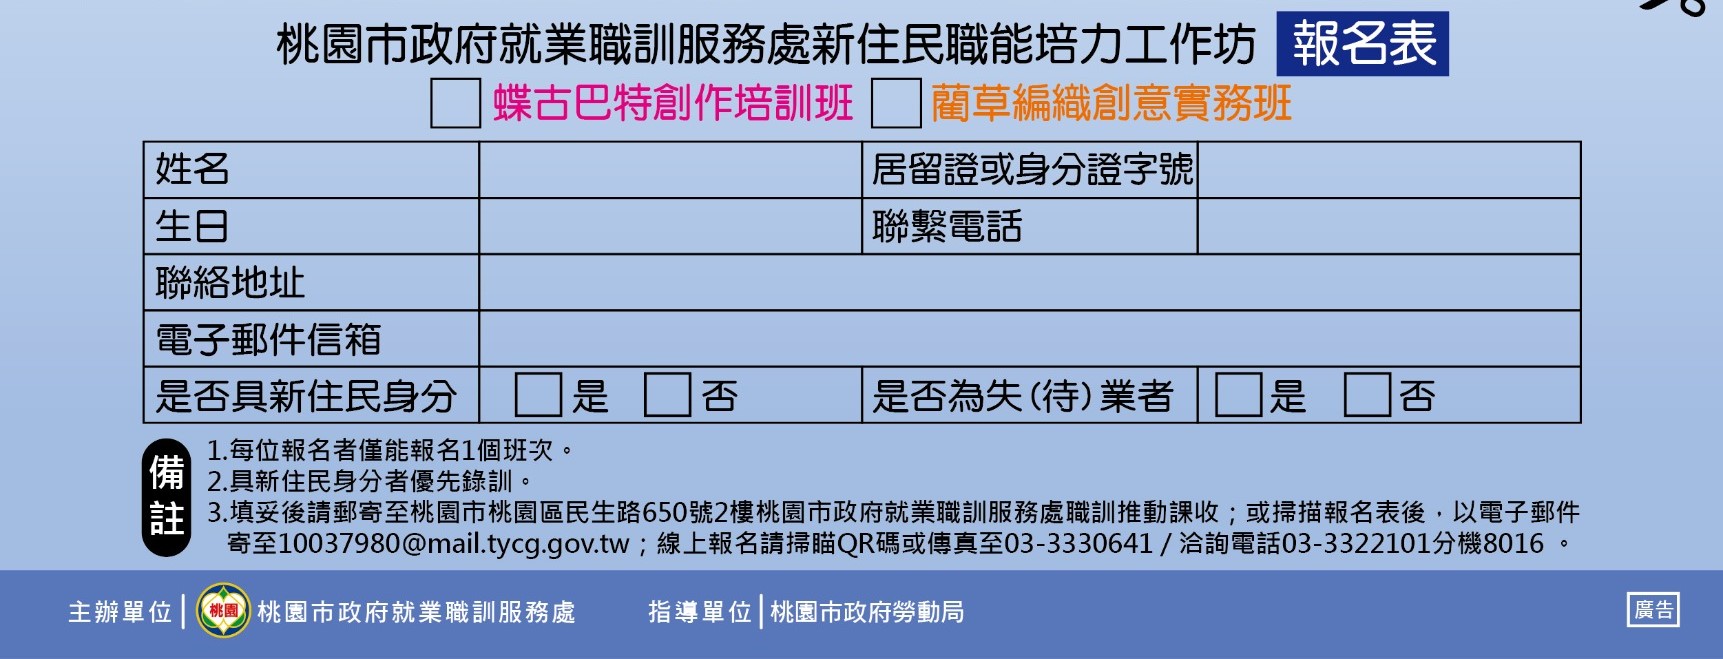 If you are interested, please fill in the registration form. (Photo / Provided by the Department of Labor, Taoyuan City Government)